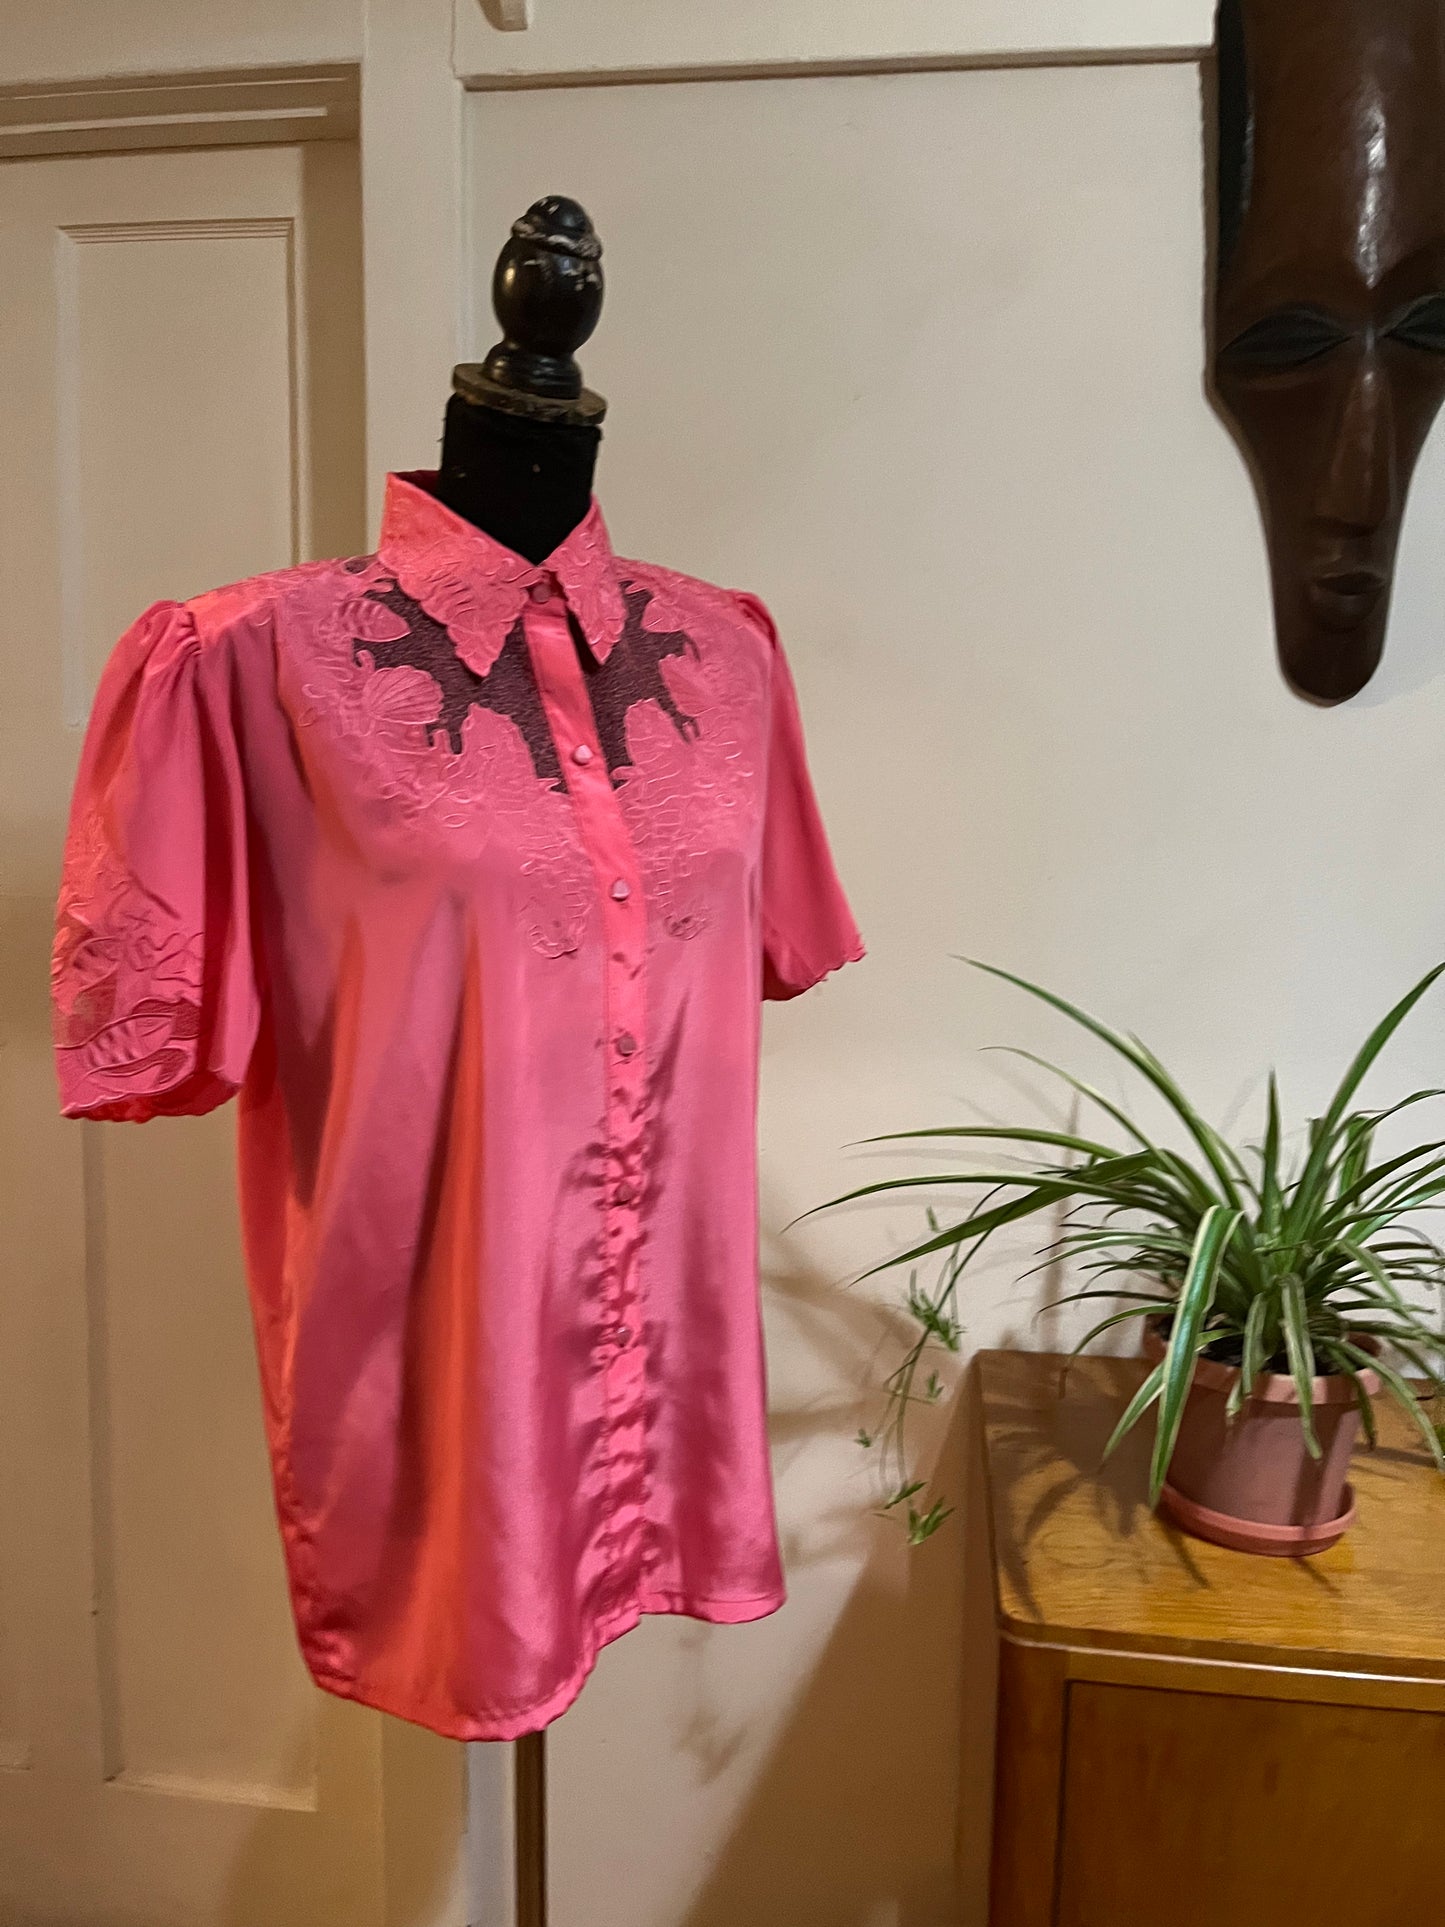 Embroidery Pink Shirt